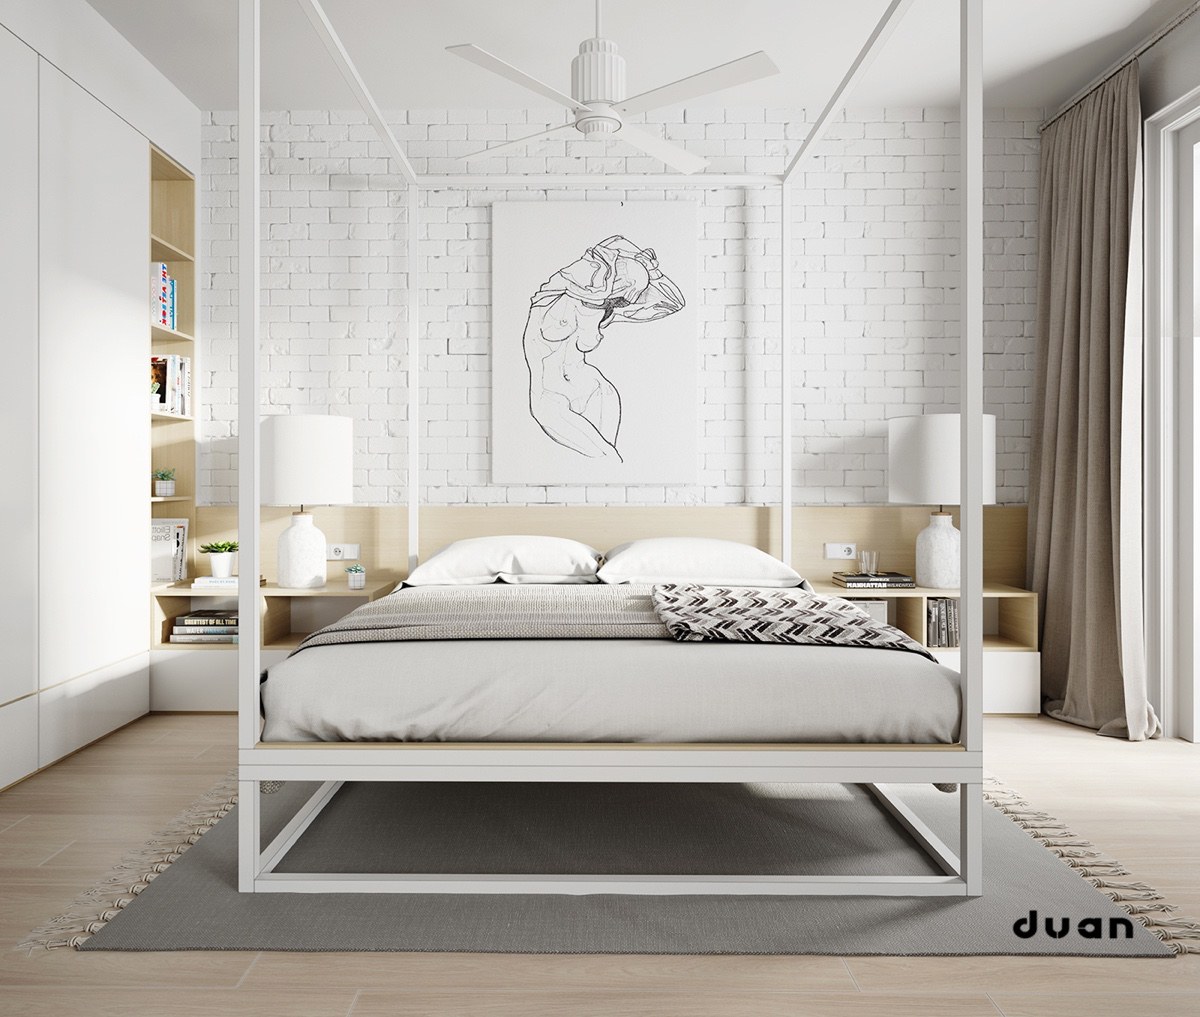 4 Poster Beds That Make An Awesome Bedroom, White Queen 4 Poster Bed